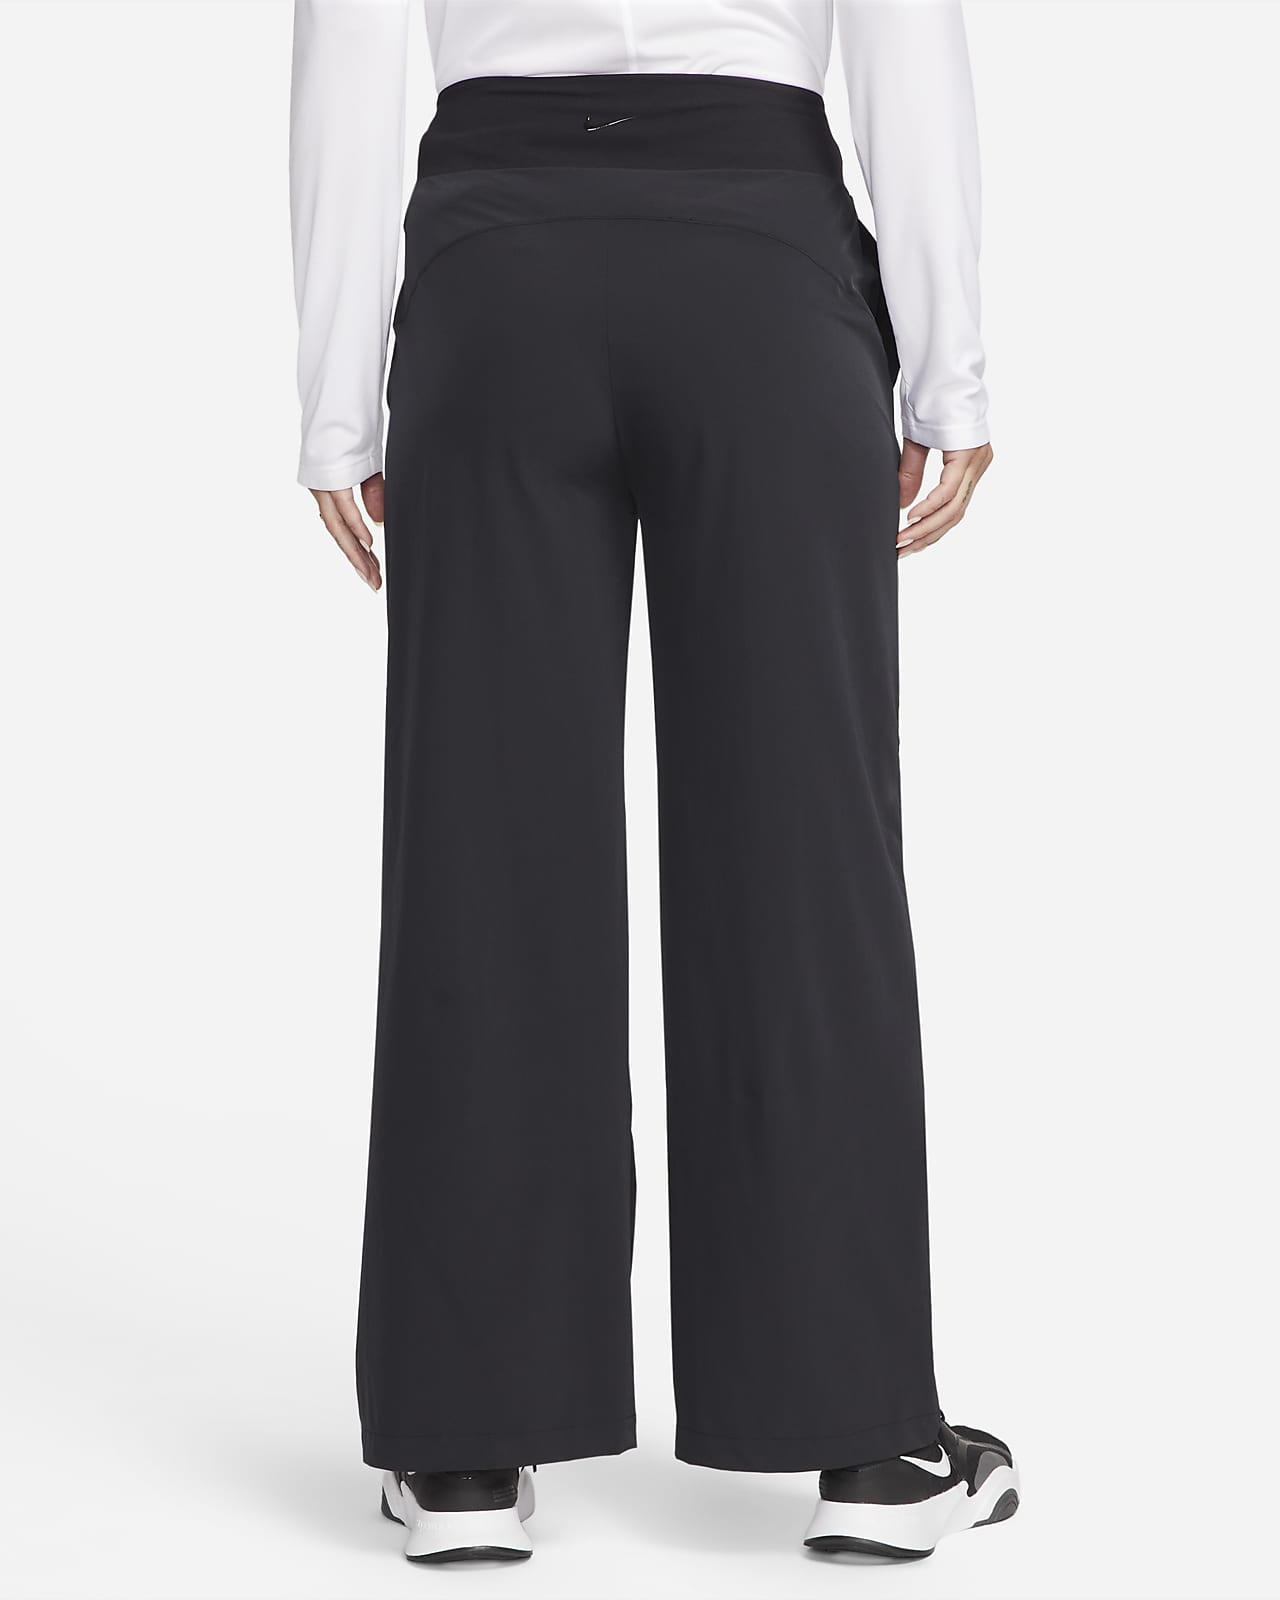 Out & About Stretch Wide Leg Pants | Talbots